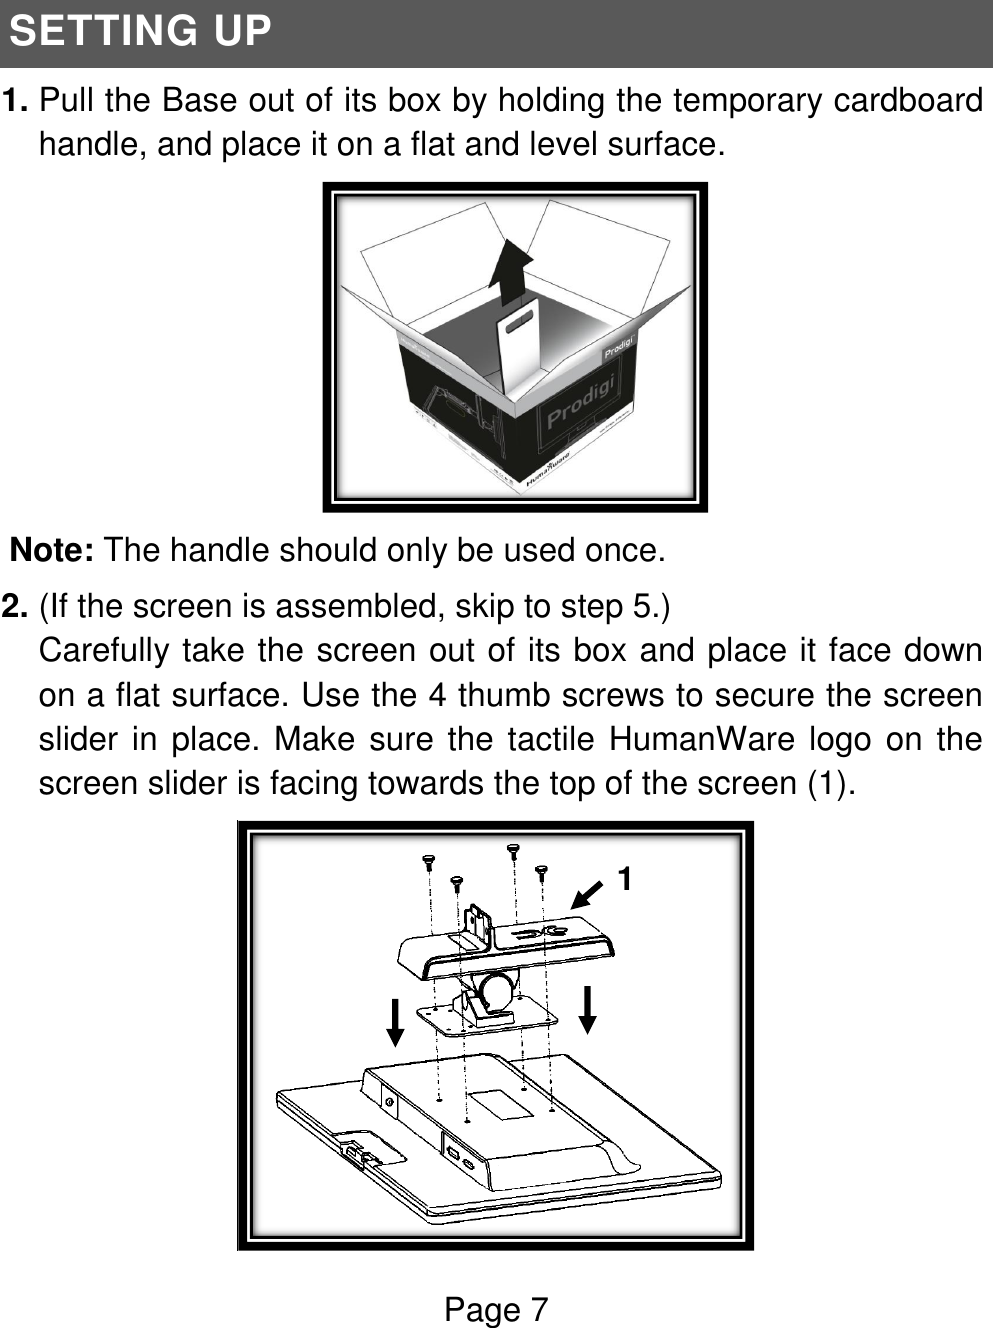 Page 7   SETTING UP 1. Pull the Base out of its box by holding the temporary cardboard handle, and place it on a flat and level surface.  Note: The handle should only be used once. 2. (If the screen is assembled, skip to step 5.) Carefully take the screen out of its box and place it face down on a flat surface. Use the 4 thumb screws to secure the screen slider in place. Make sure the tactile HumanWare logo on the screen slider is facing towards the top of the screen (1).   1  